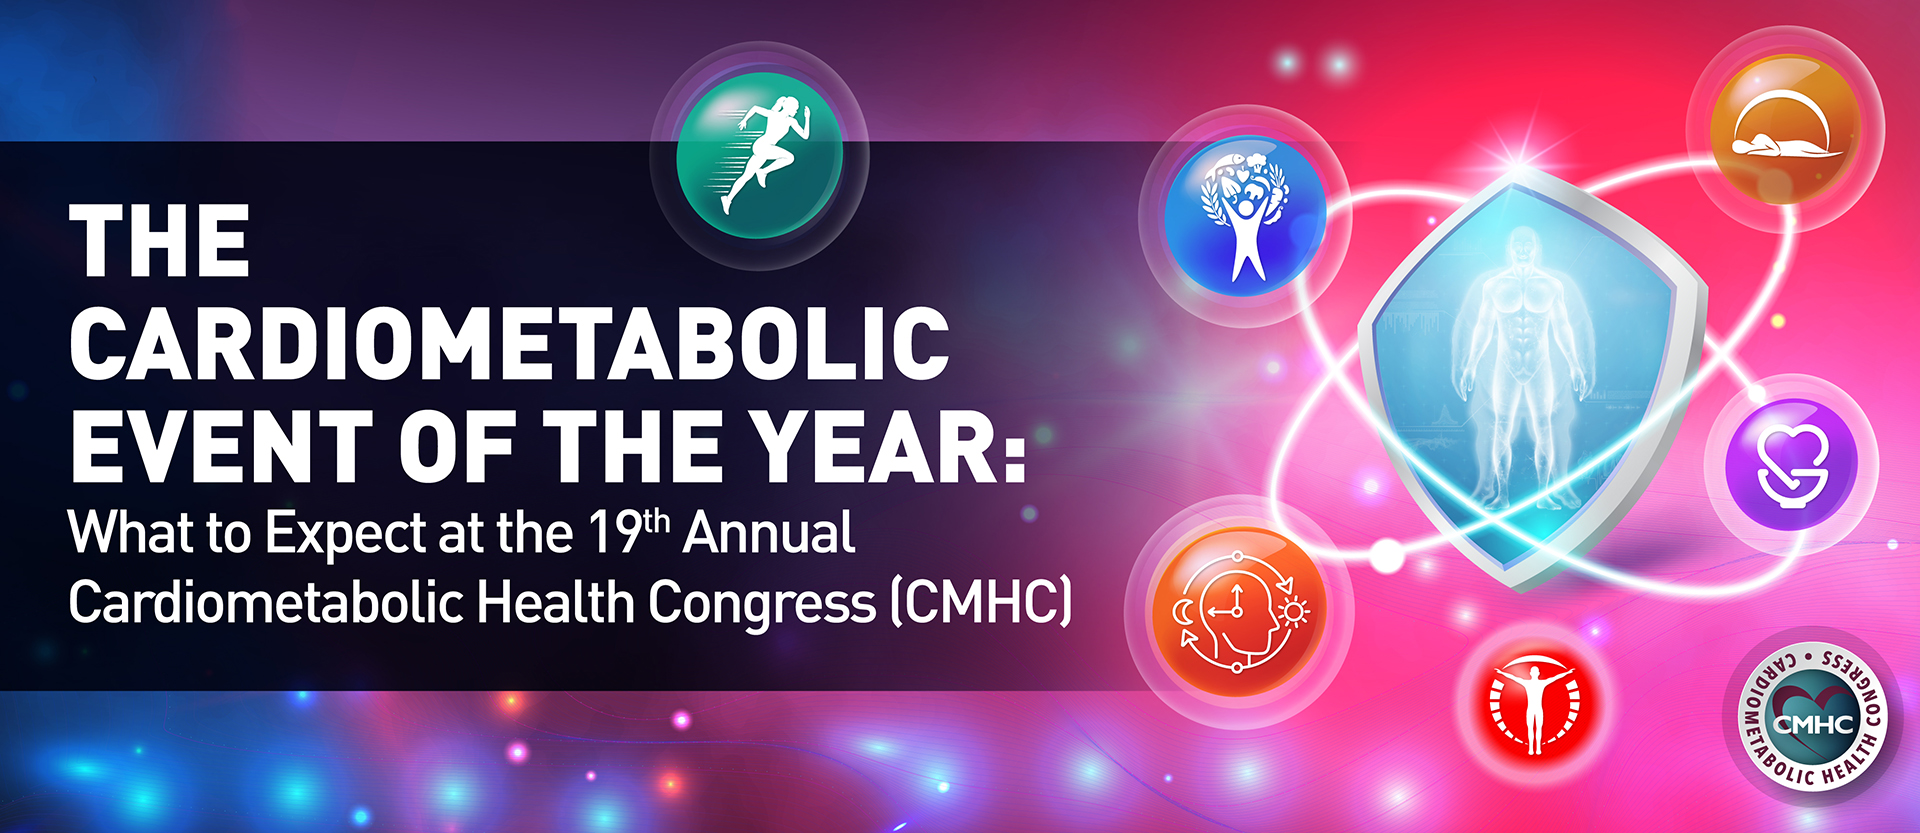 The Cardiometabolic Event of the Year: What to Expect at the 19th Annual Cardiometabolic Health Congress (CMHC) 